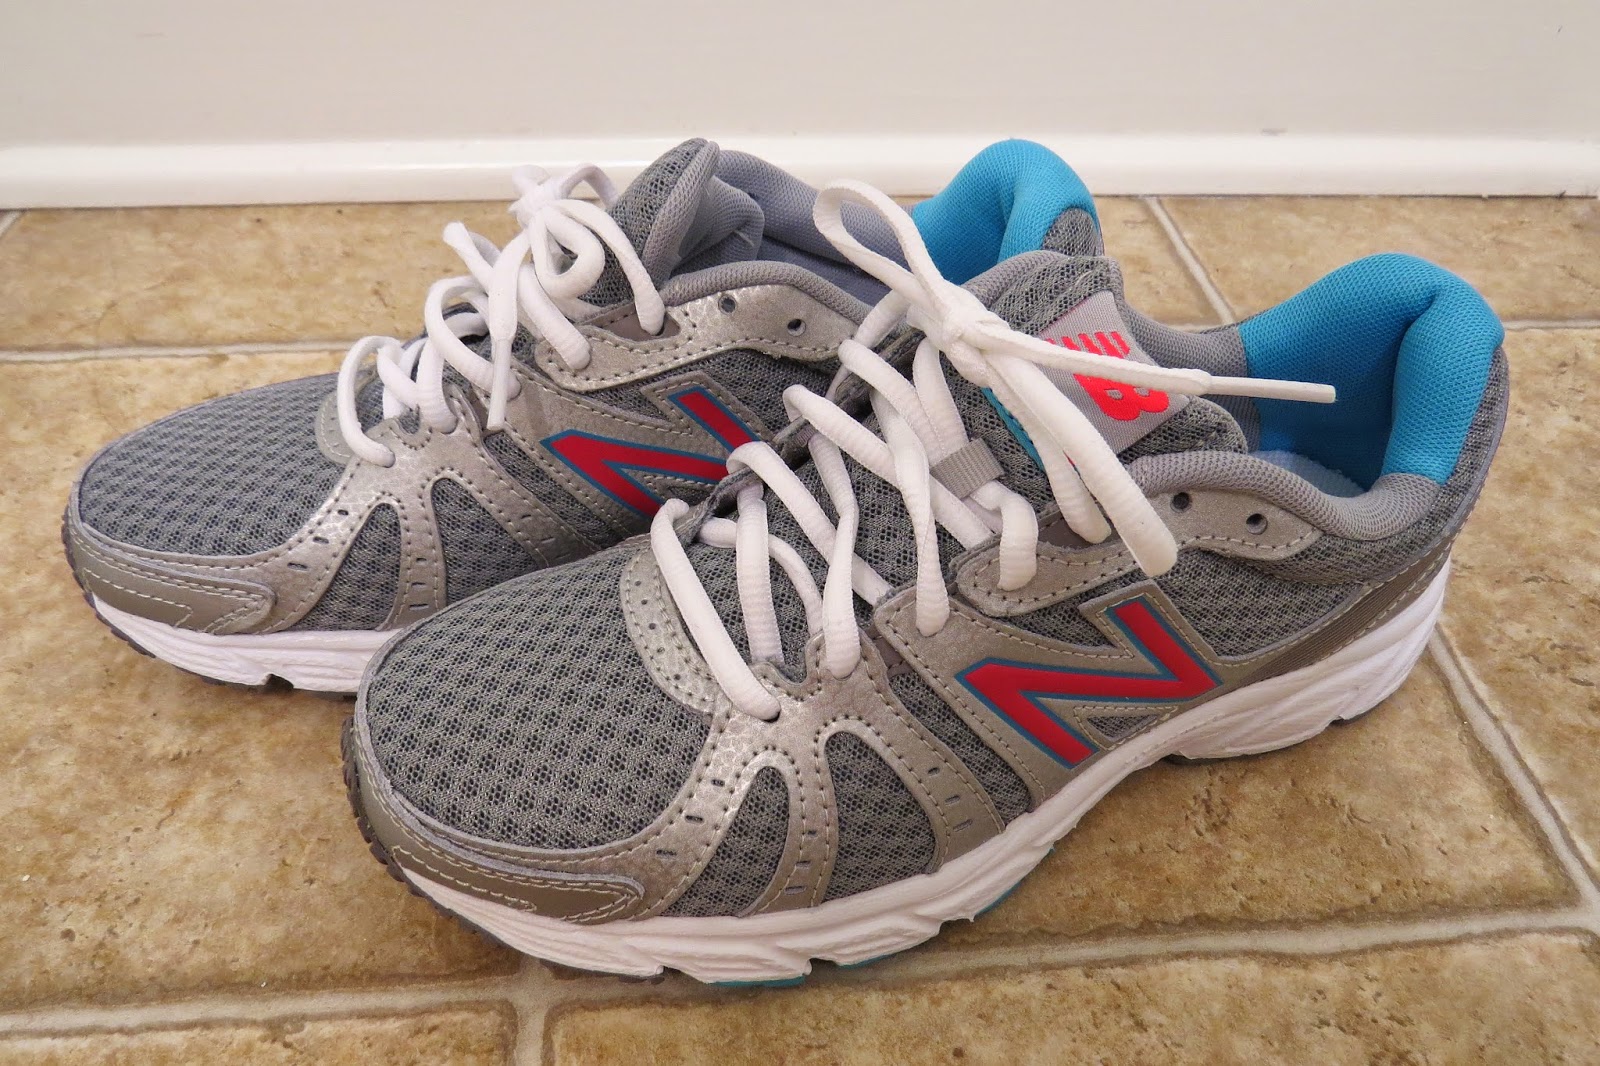 My New Running Shoes - New Balance 450v2 | It has grown on me!